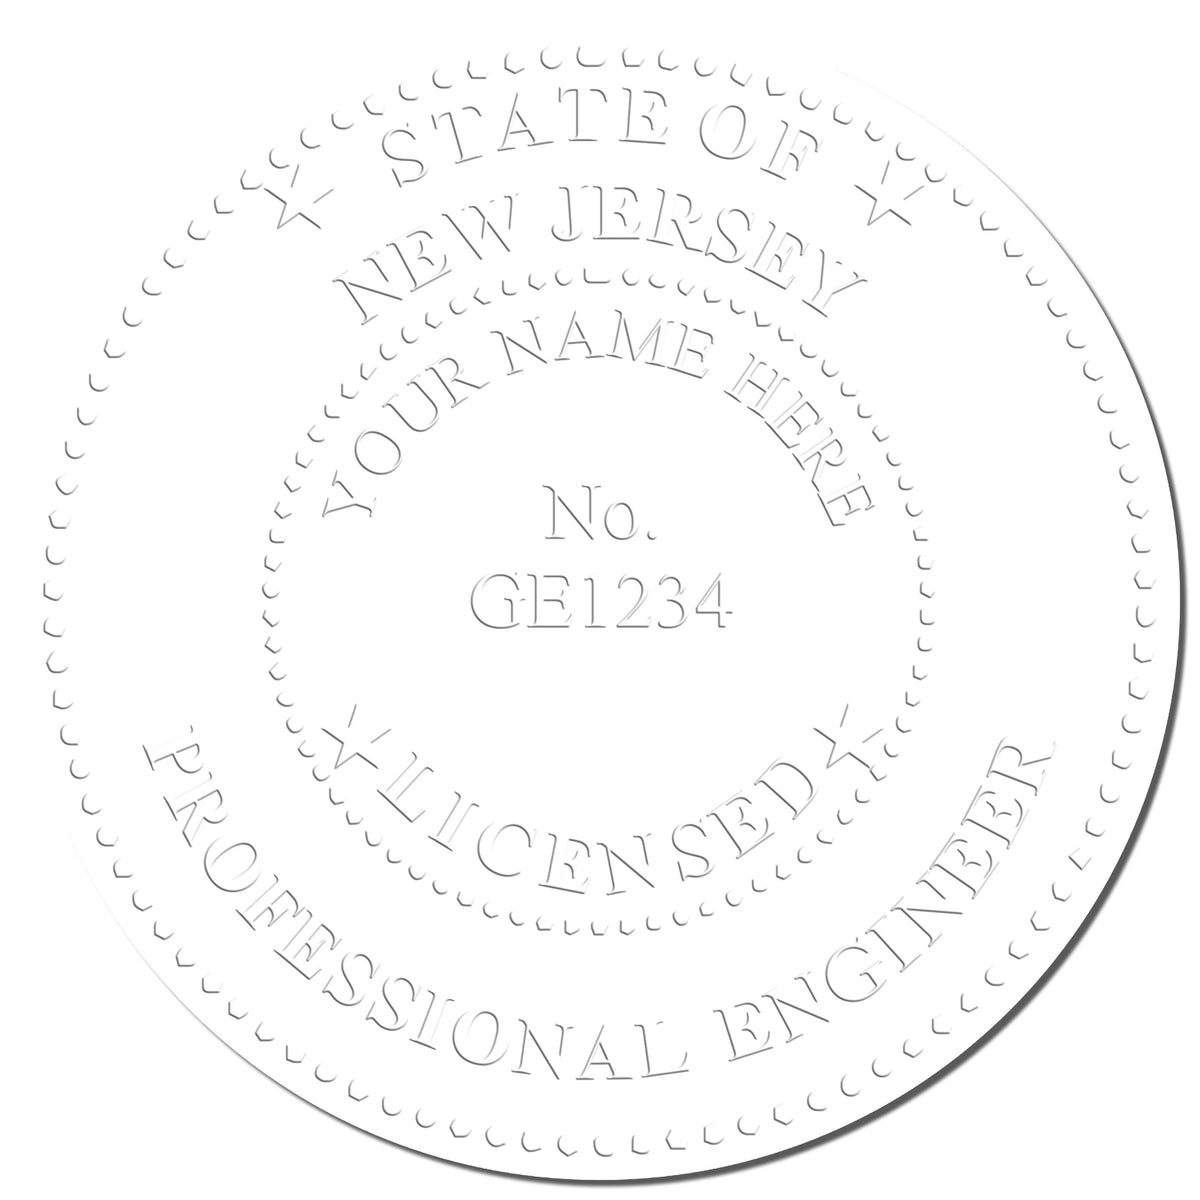 This paper is stamped with a sample imprint of the State of New Jersey Extended Long Reach Engineer Seal, signifying its quality and reliability.